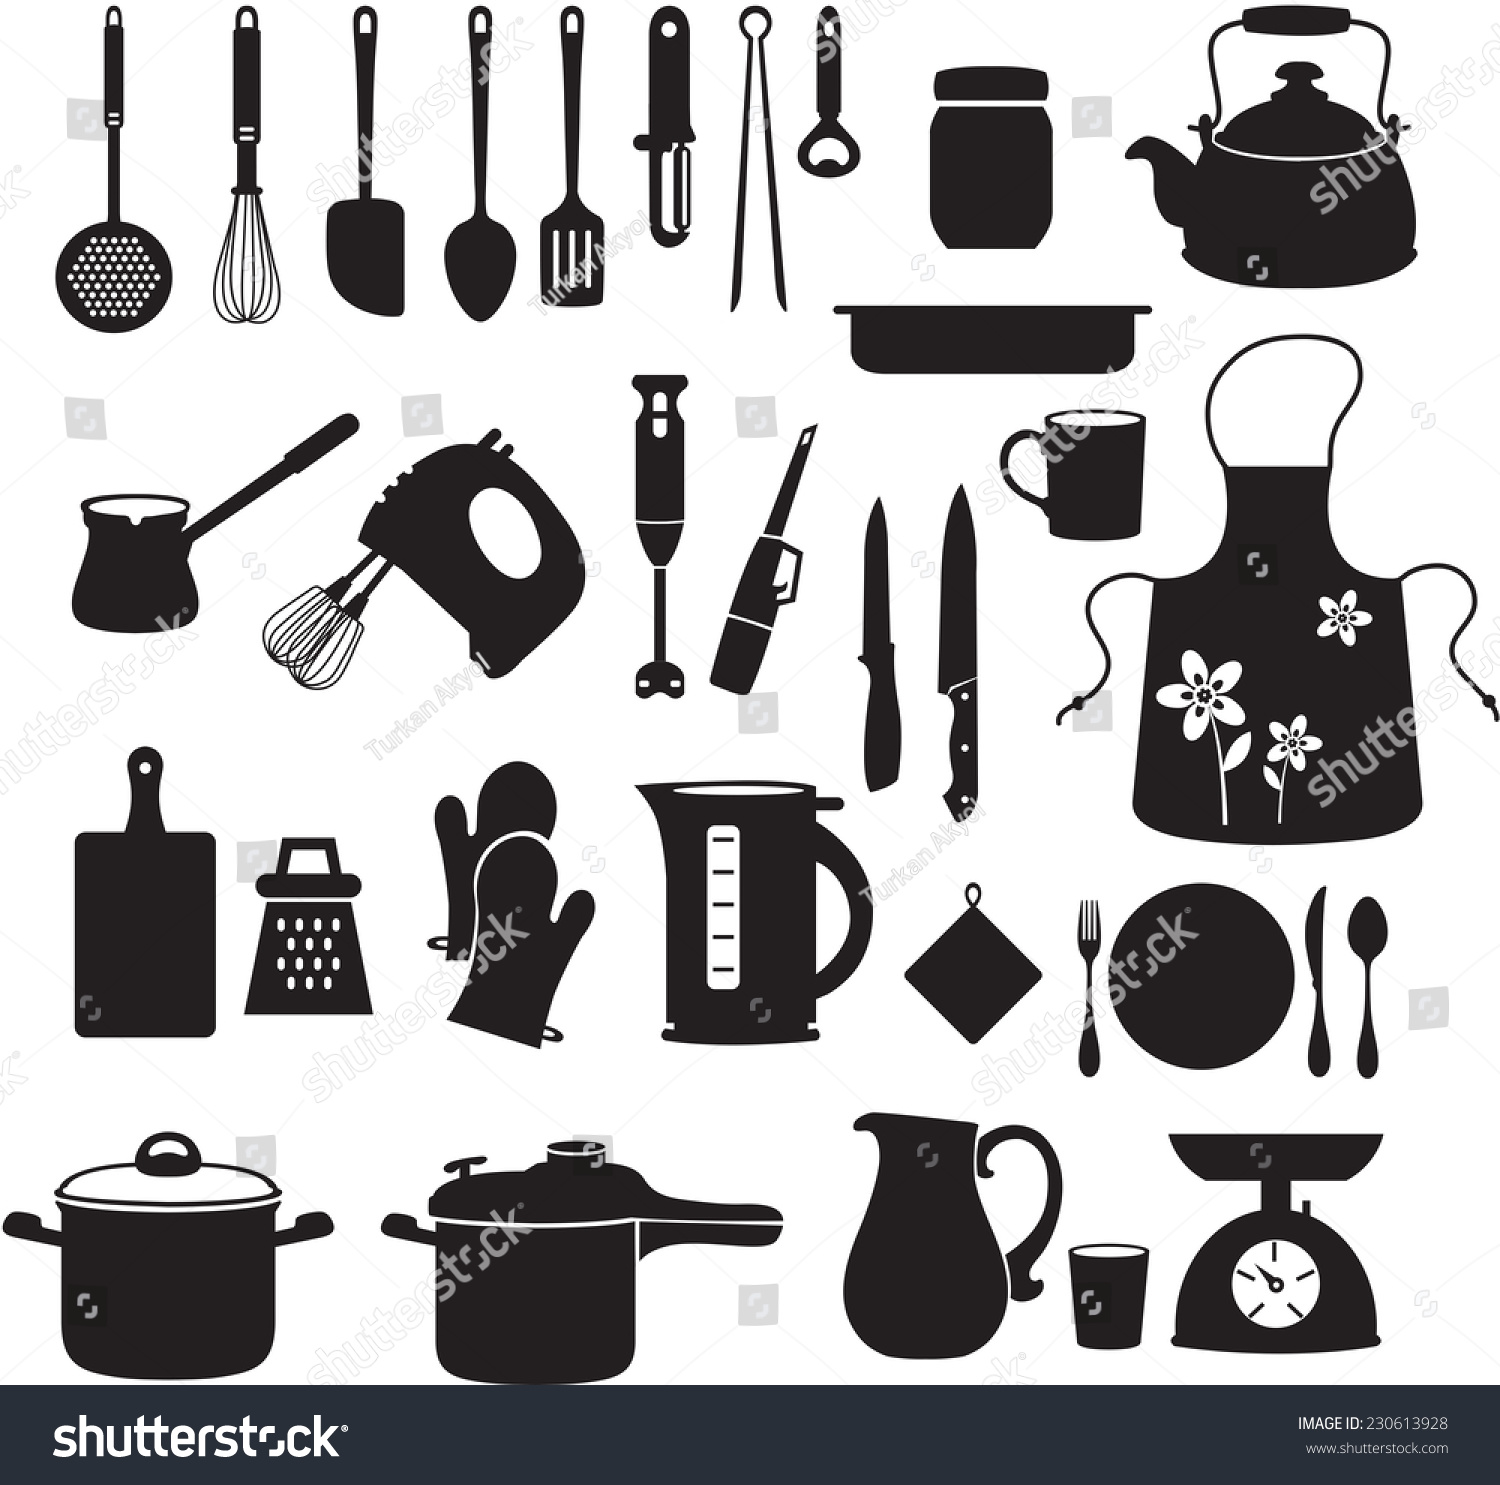 Kitchen Tool Collection Stock Vector 230613928 - Shutterstock